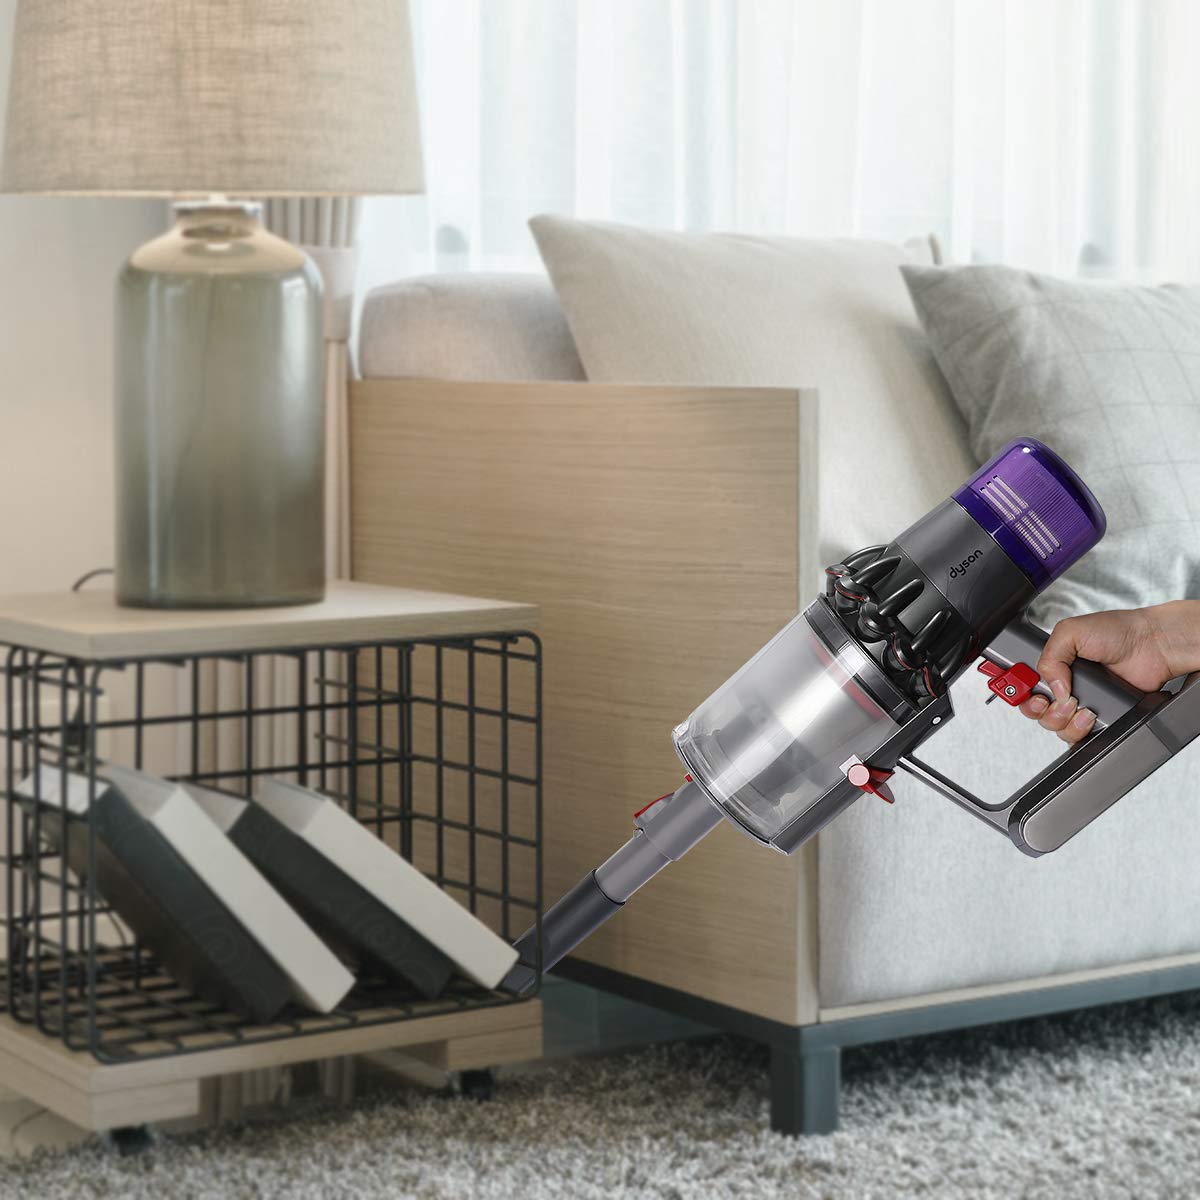 Just easily connect your universal or old generation attachments to your new vacuums with this adapter! 